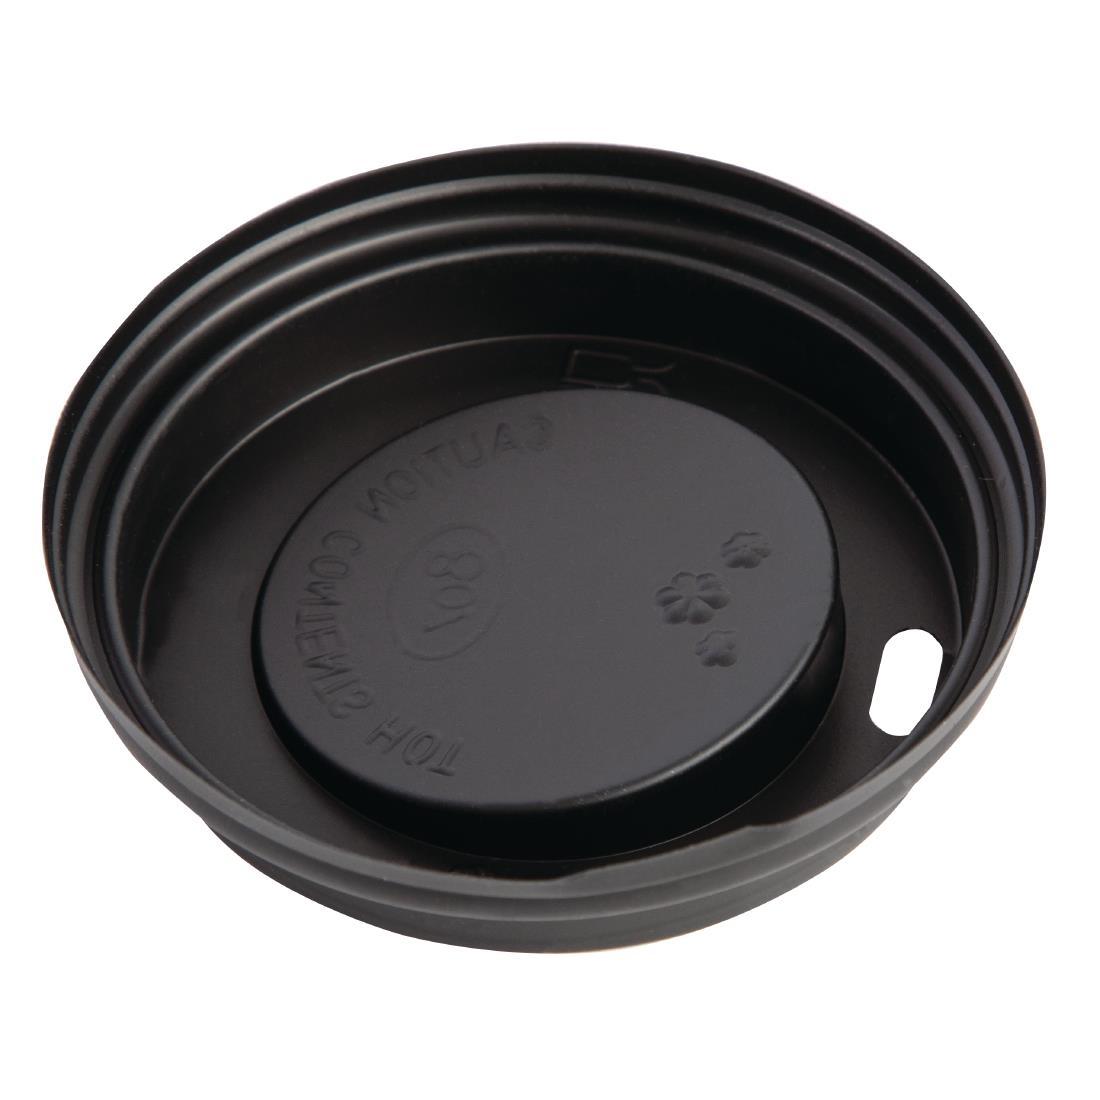 Fiesta Recyclable Coffee Cup Lids Black 225ml / 8oz (Pack of 50) - CW715  - 3